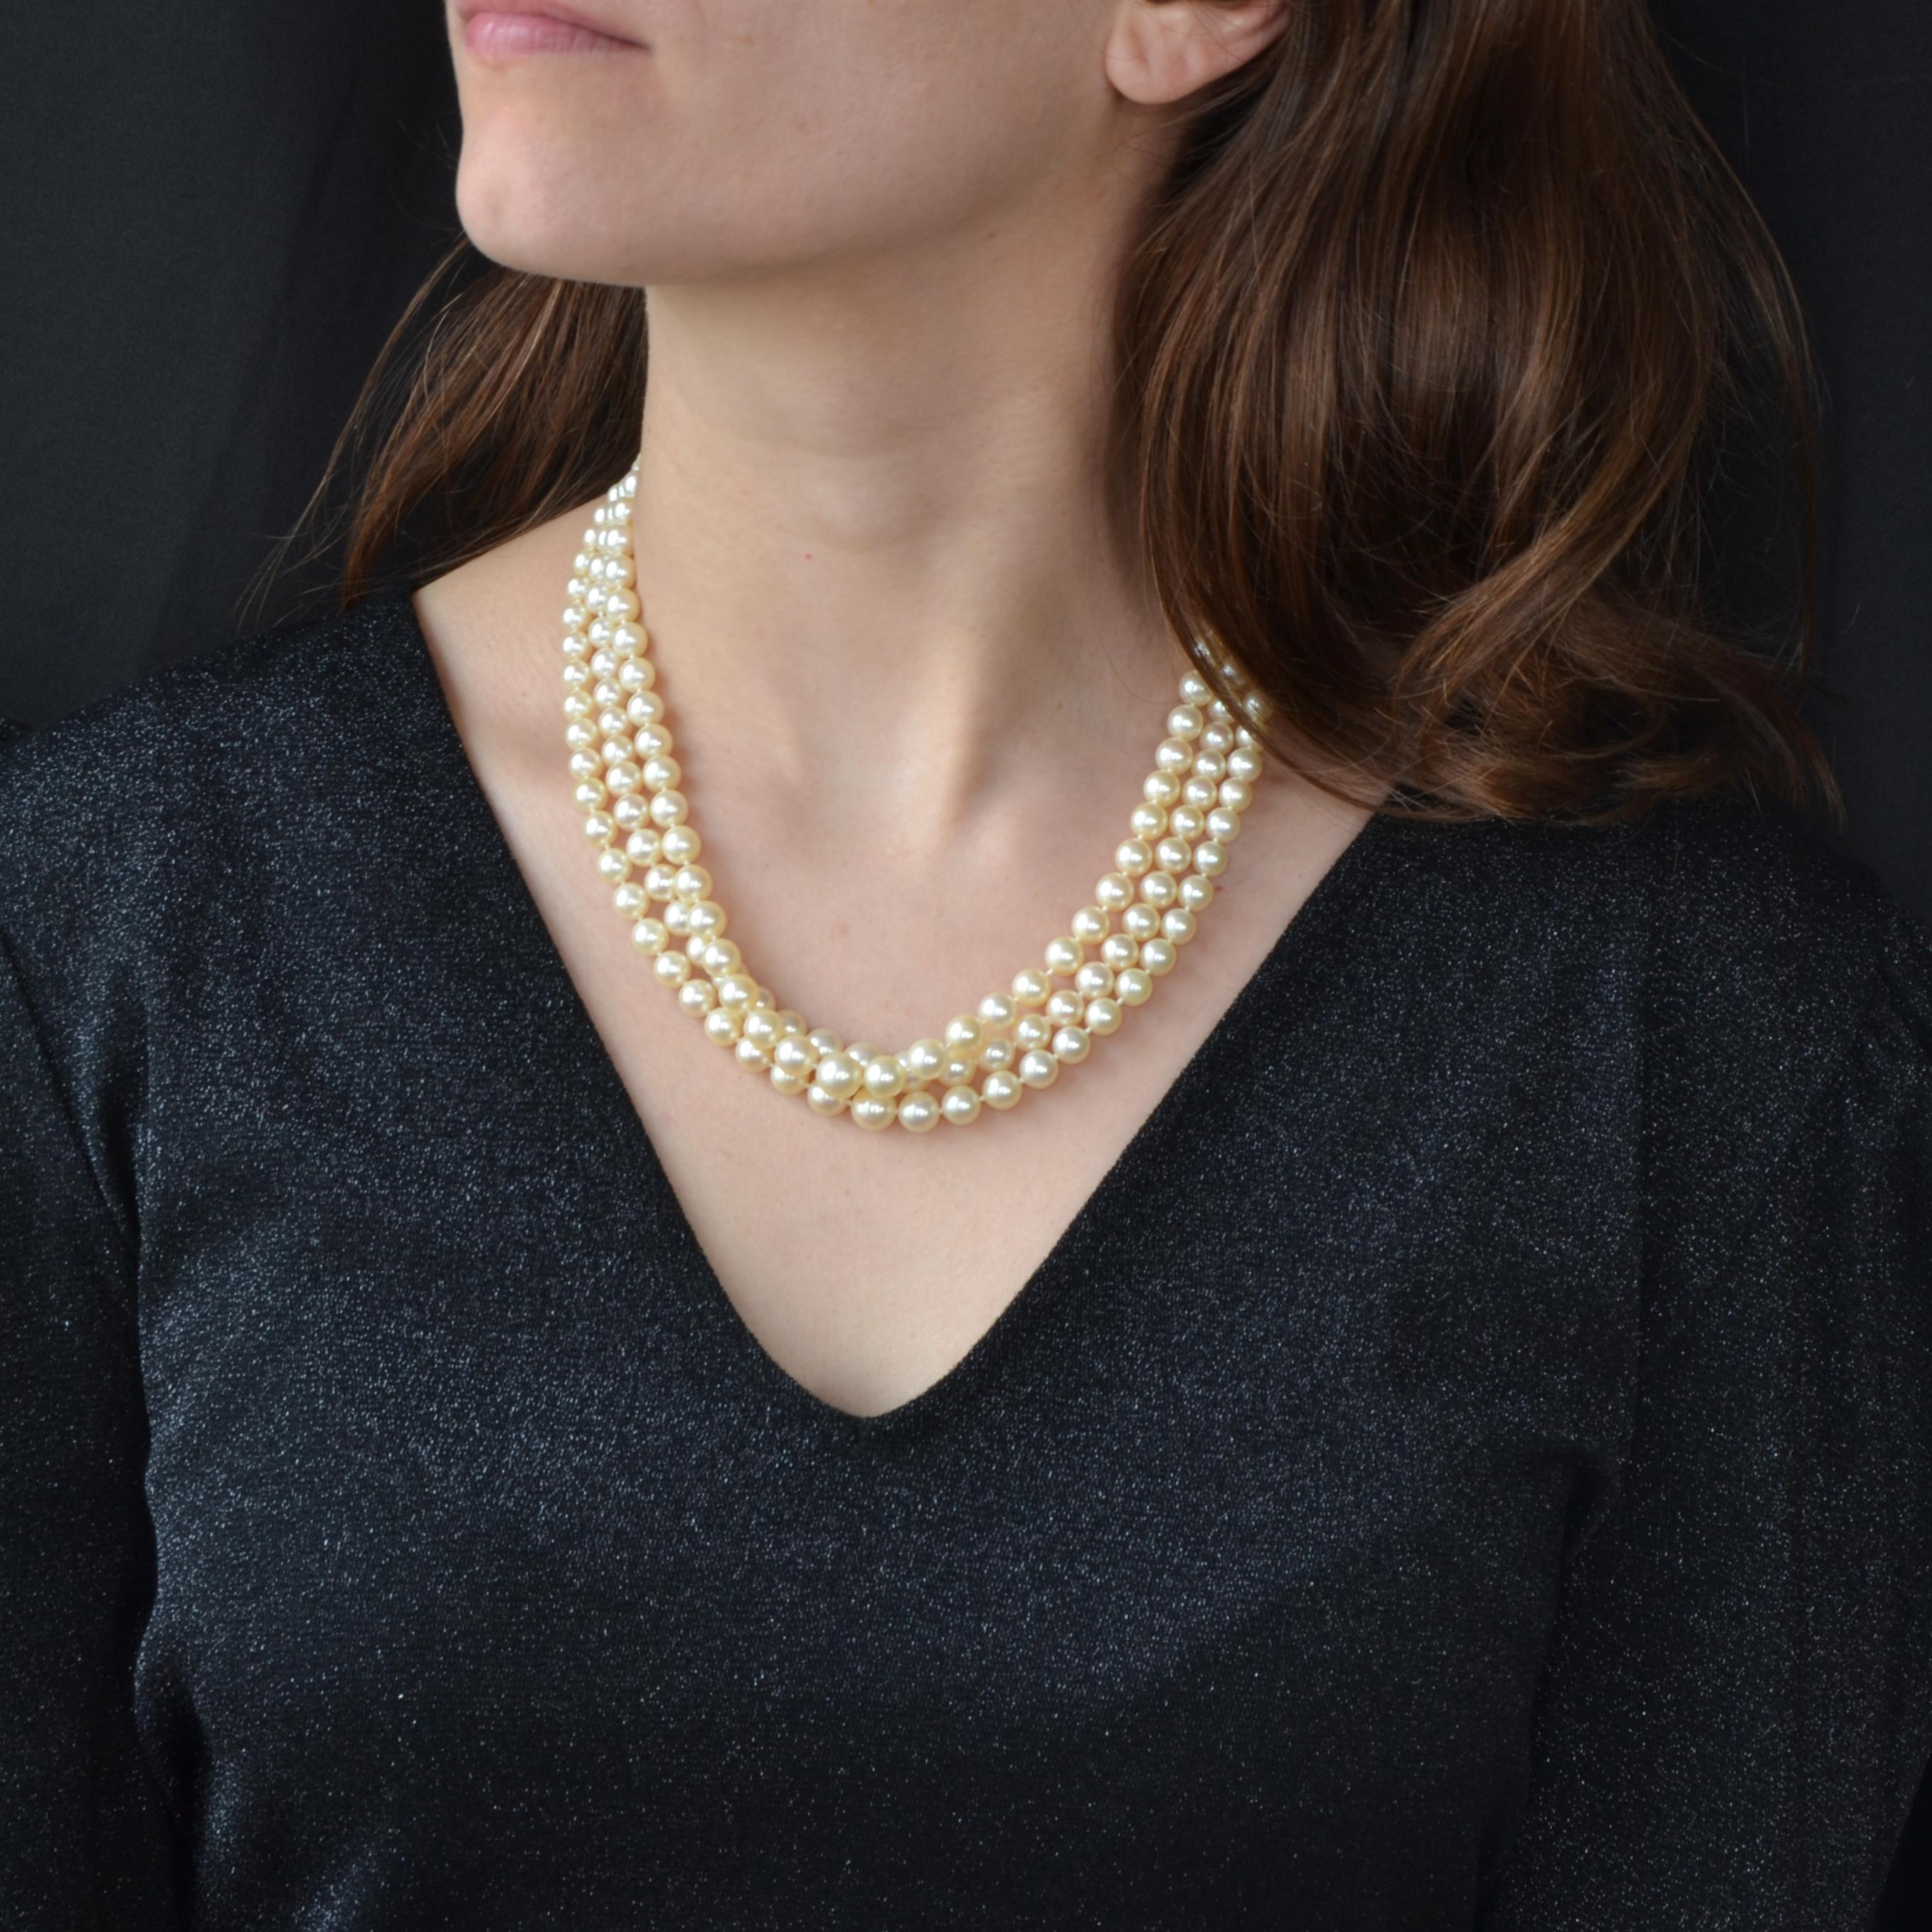 Necklace composed of a triple row of cultured pearls in fall.
The clasp is a clasp fagot with link, set with diamonds, ratchet, and 18 karat white gold, eagle head hallmark.
The pearl with a white shaded orient.
Diameter of the pearls : from 4,5/ 5